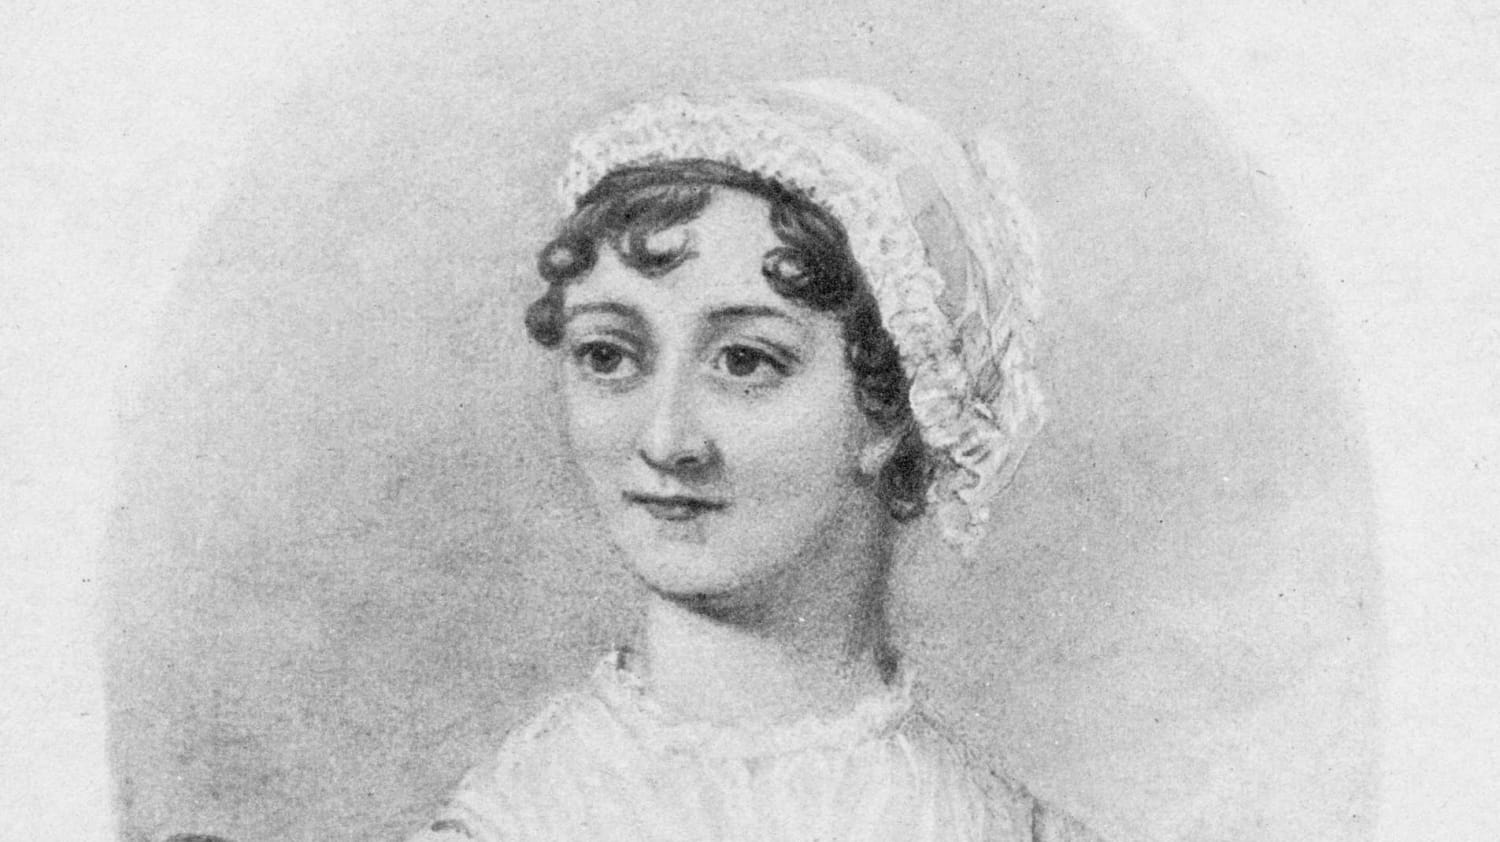 Jane Austen's Handwritten Letter About a Nightmarish Visit to the Dentist Is Up for Auction